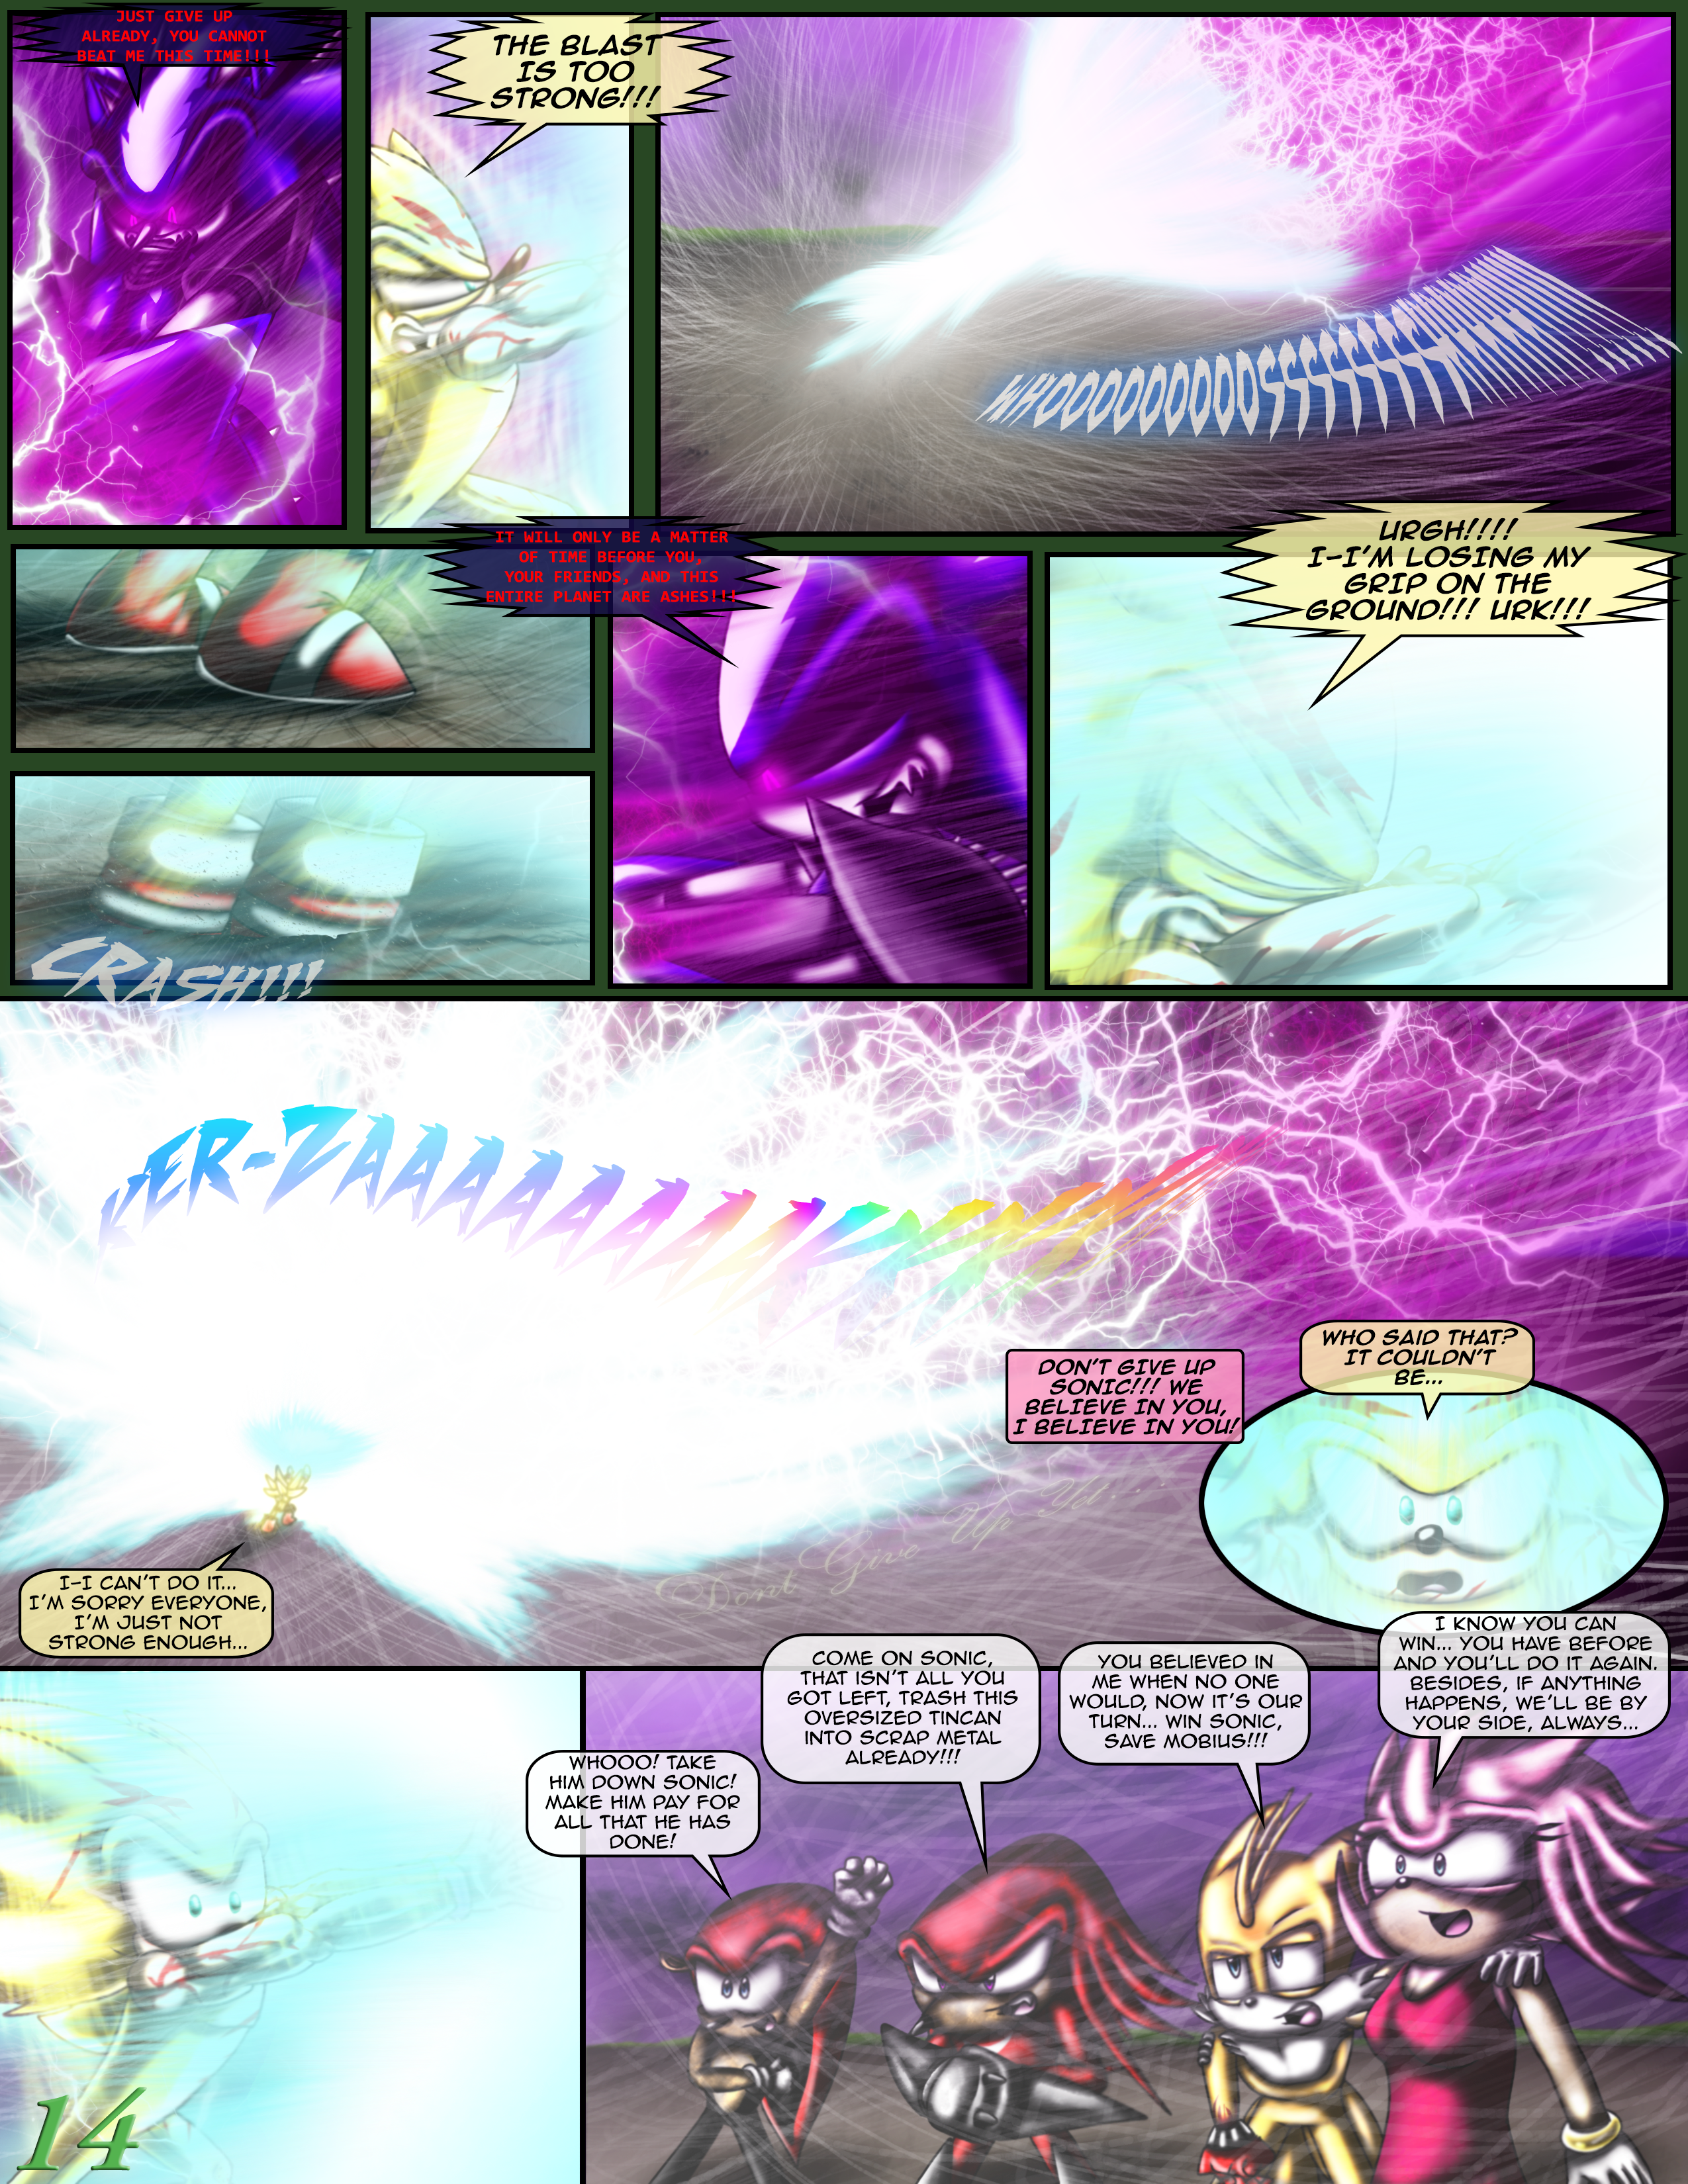 Sonic the Hedgehog Z #15 Pg. 14 January 2017 by CCI545 on DeviantArt